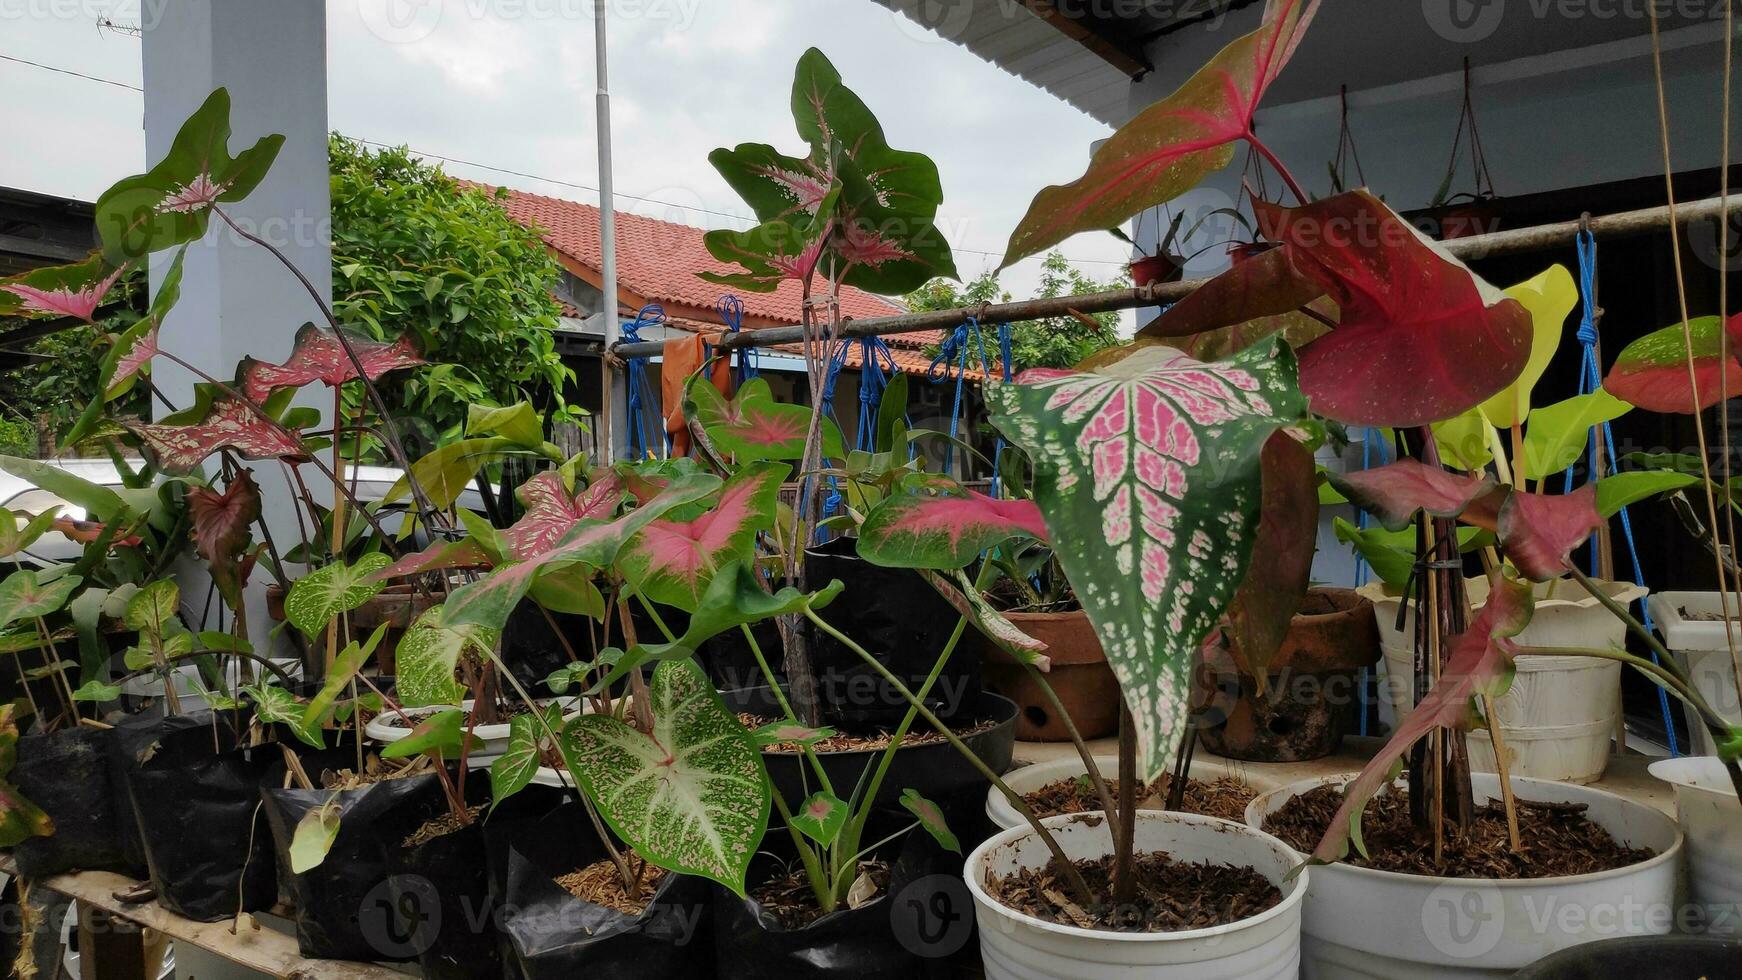 Taro is a group of plants from the genus Caladium photo